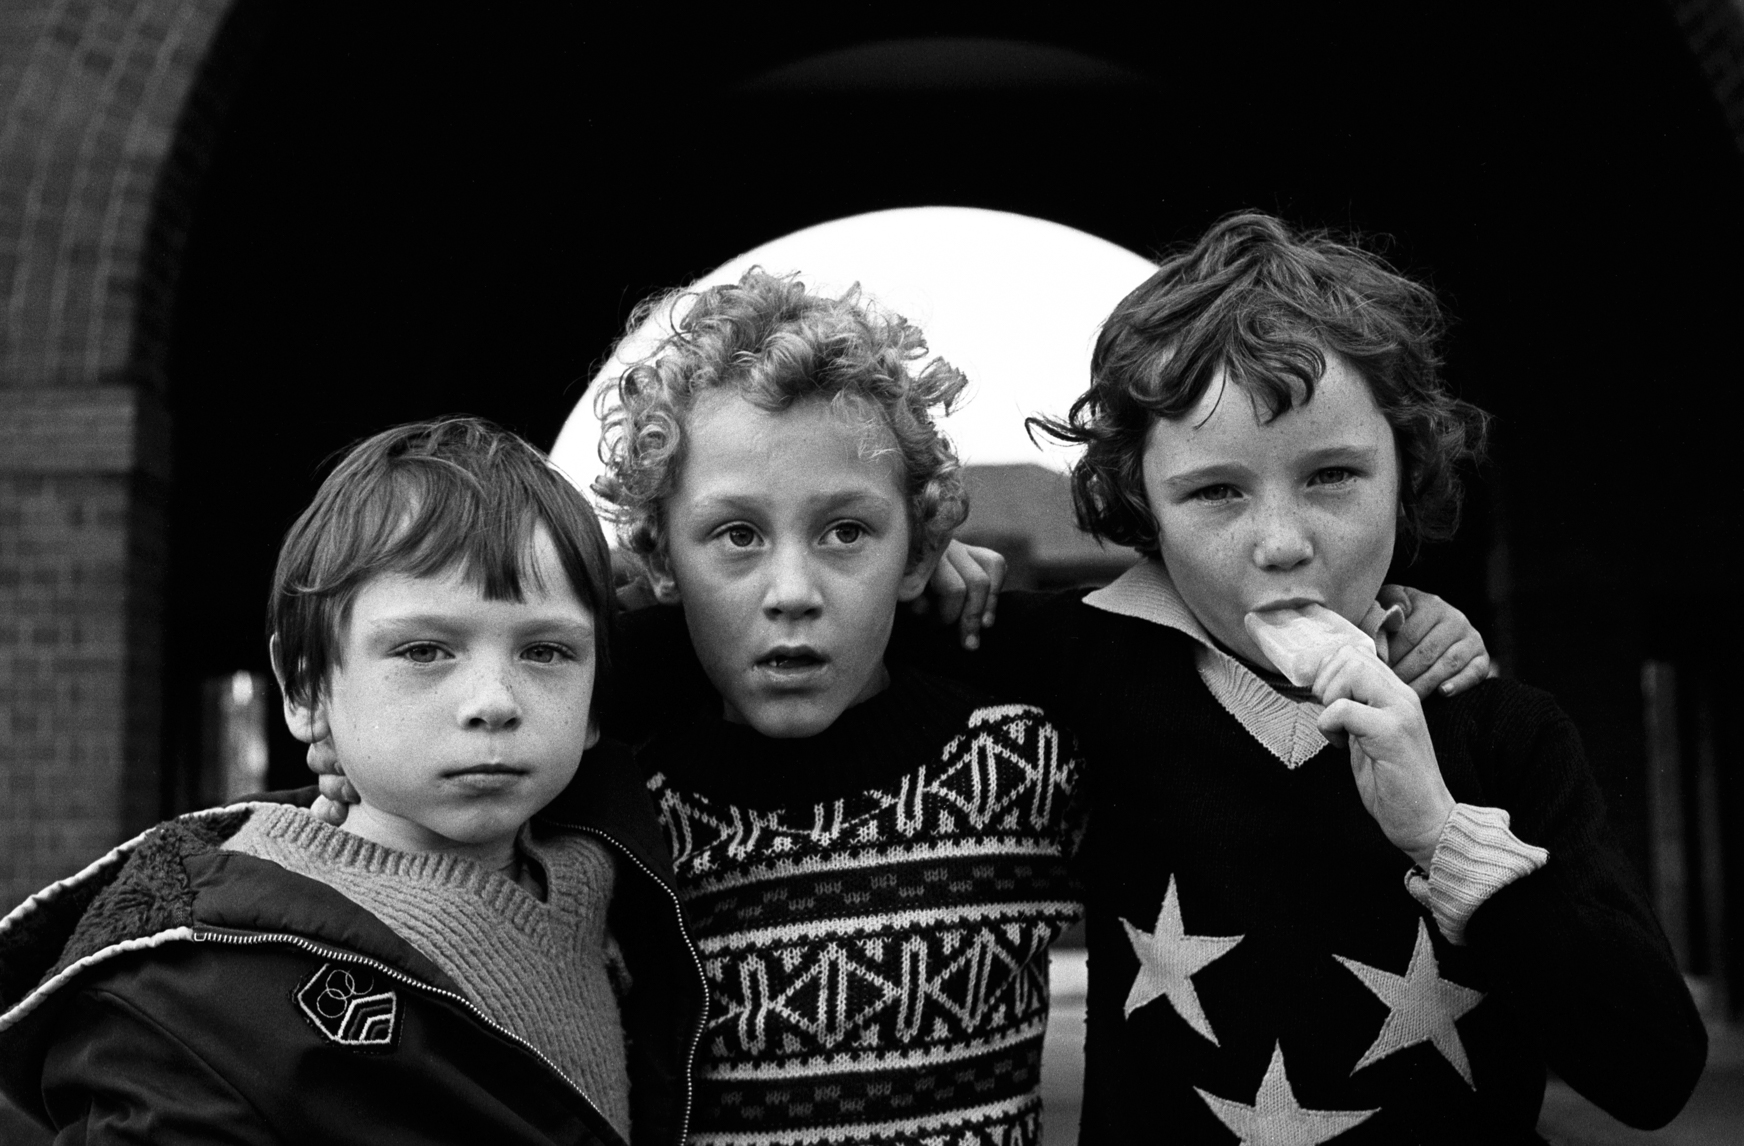 Actor Stephen Lord As A Child With Brother Anthony And Friend John Howells, Salford, 1977'